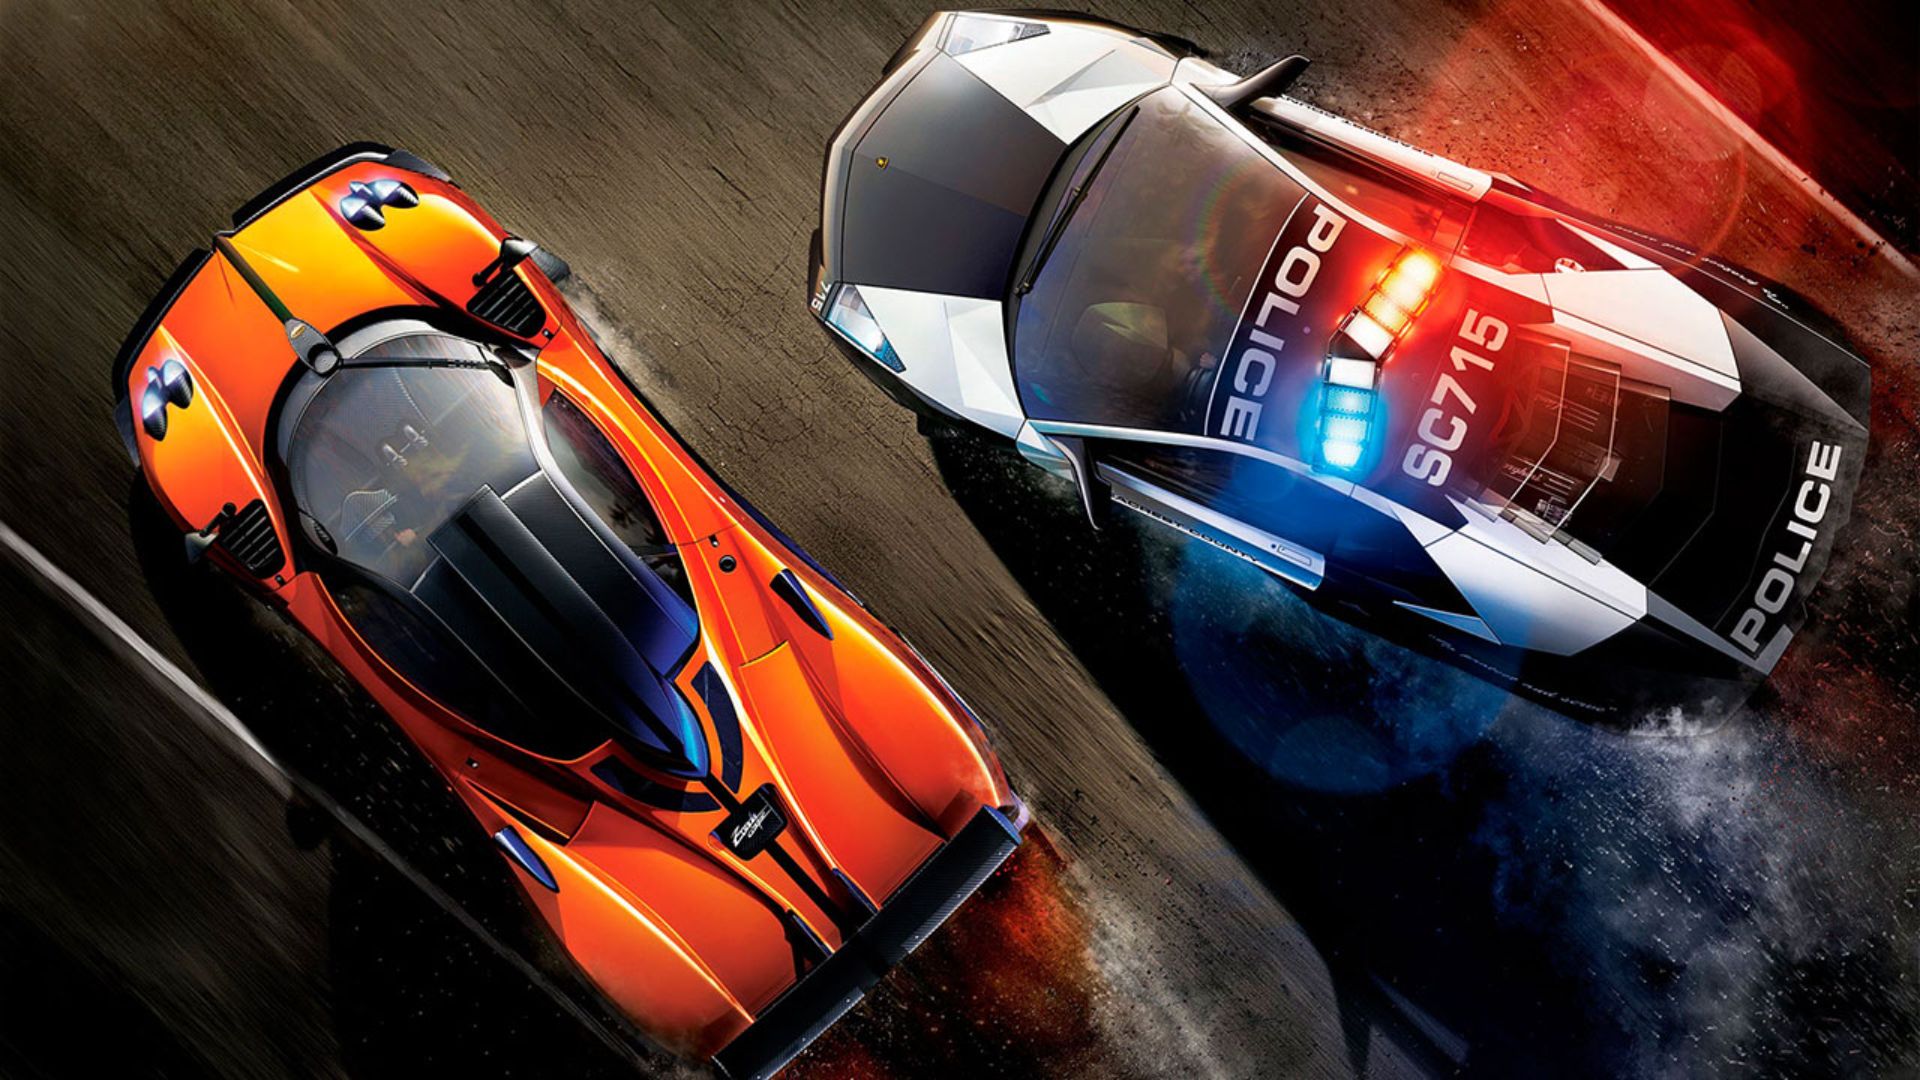 Best Switch racing games: An orange race car tries to escape police in Need for Speed Hot Pursuit